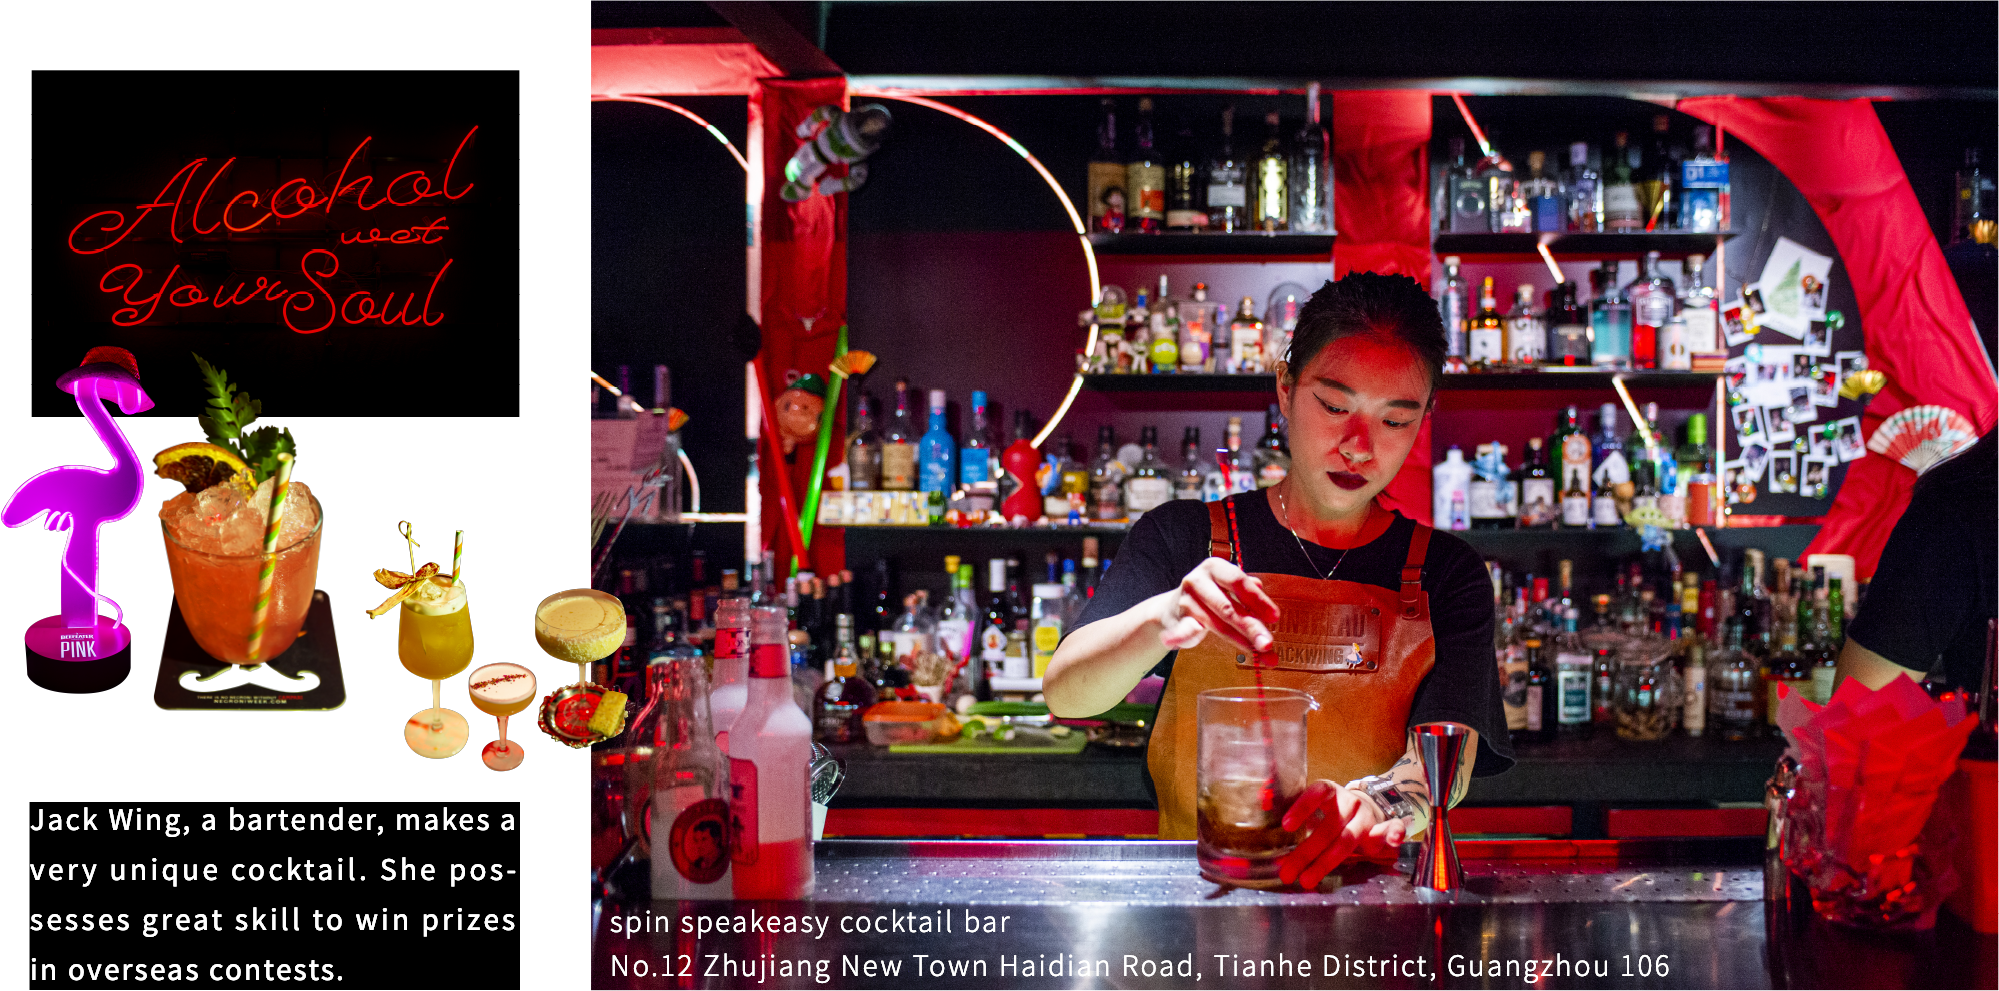 Jack Wing, a bartender, makes a very unique cocktail. She possesses great skill to win prizes in overseas contests.